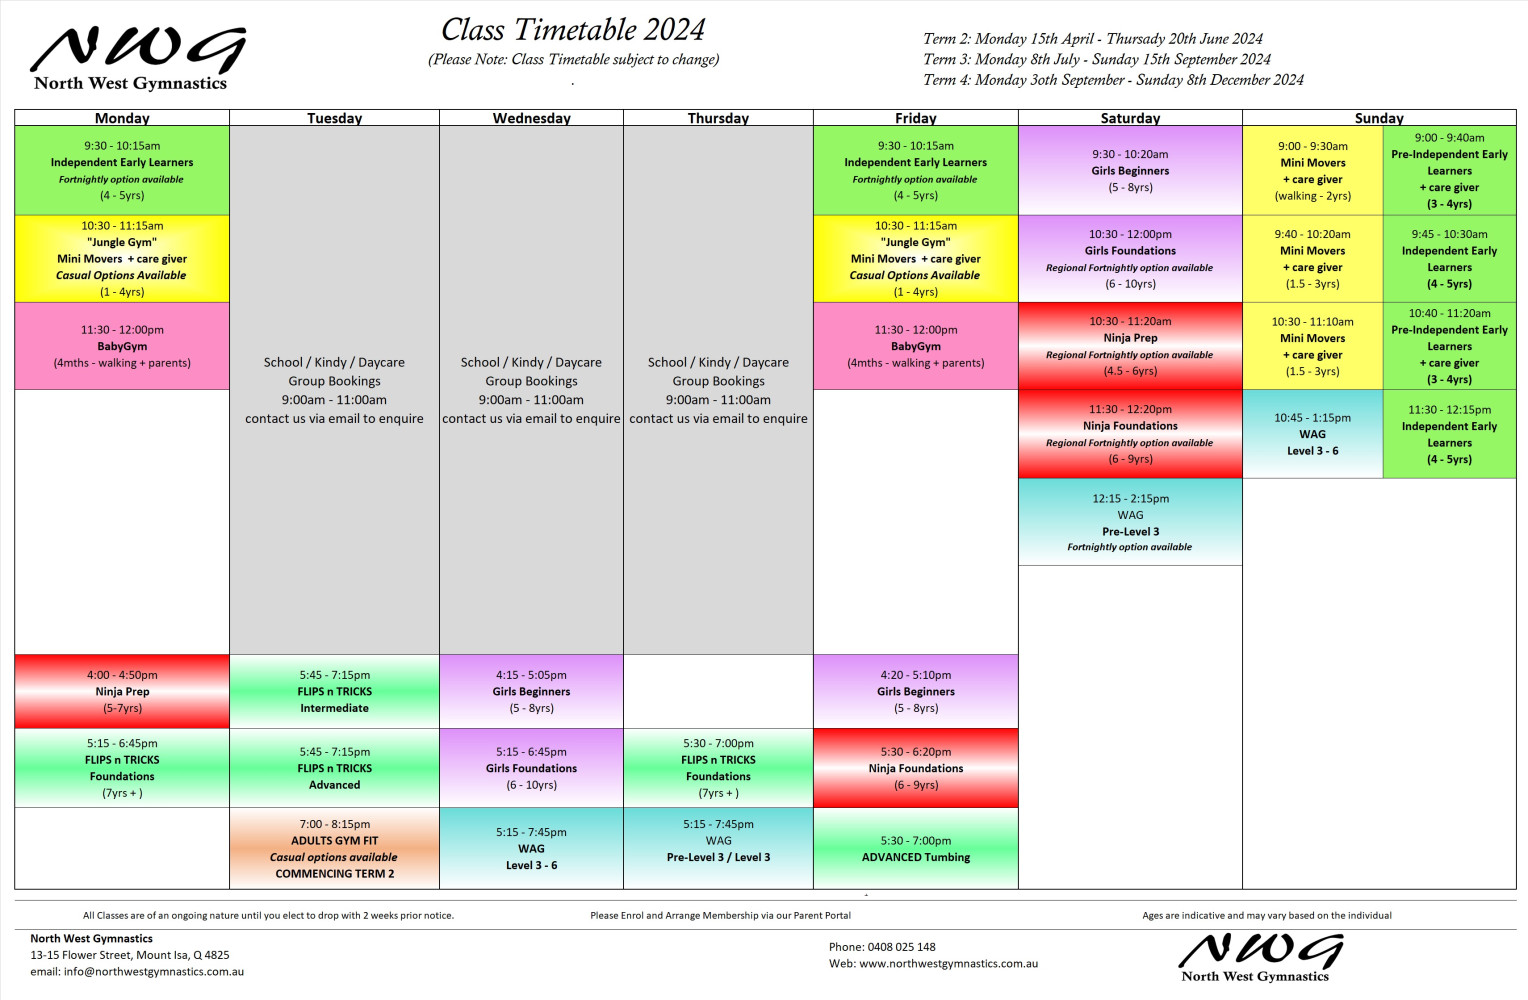 North West Gymnastics Class Timetable NWG Mount Isa